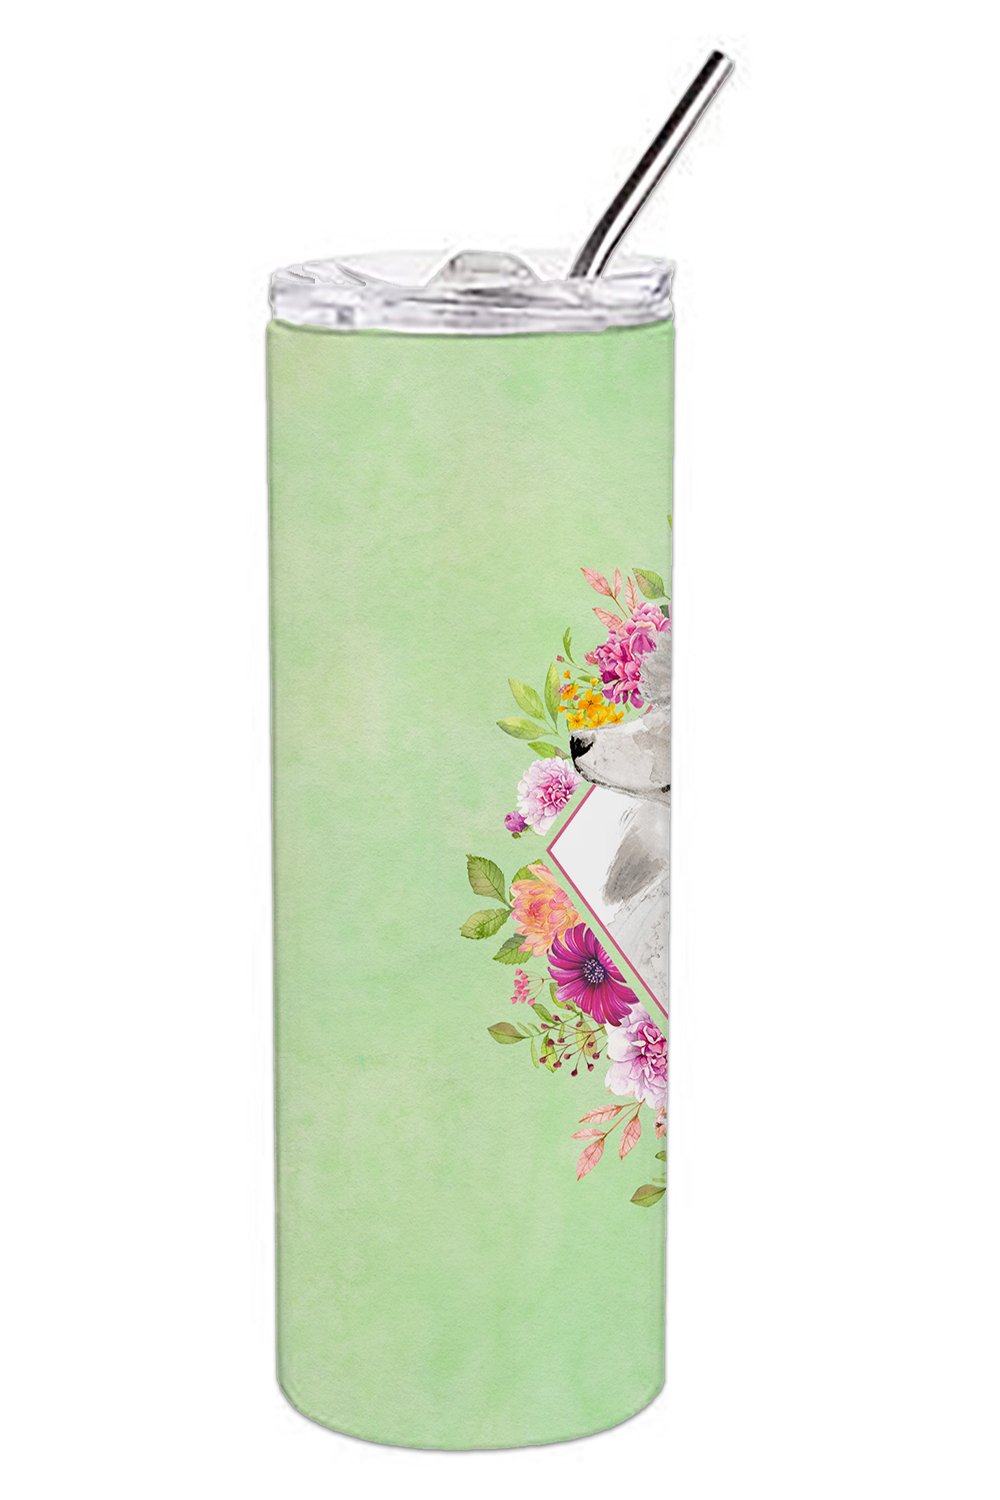 White Standard Poodle Green Flowers Double Walled Stainless Steel 20 oz Skinny Tumbler CK4360TBL20 by Caroline's Treasures